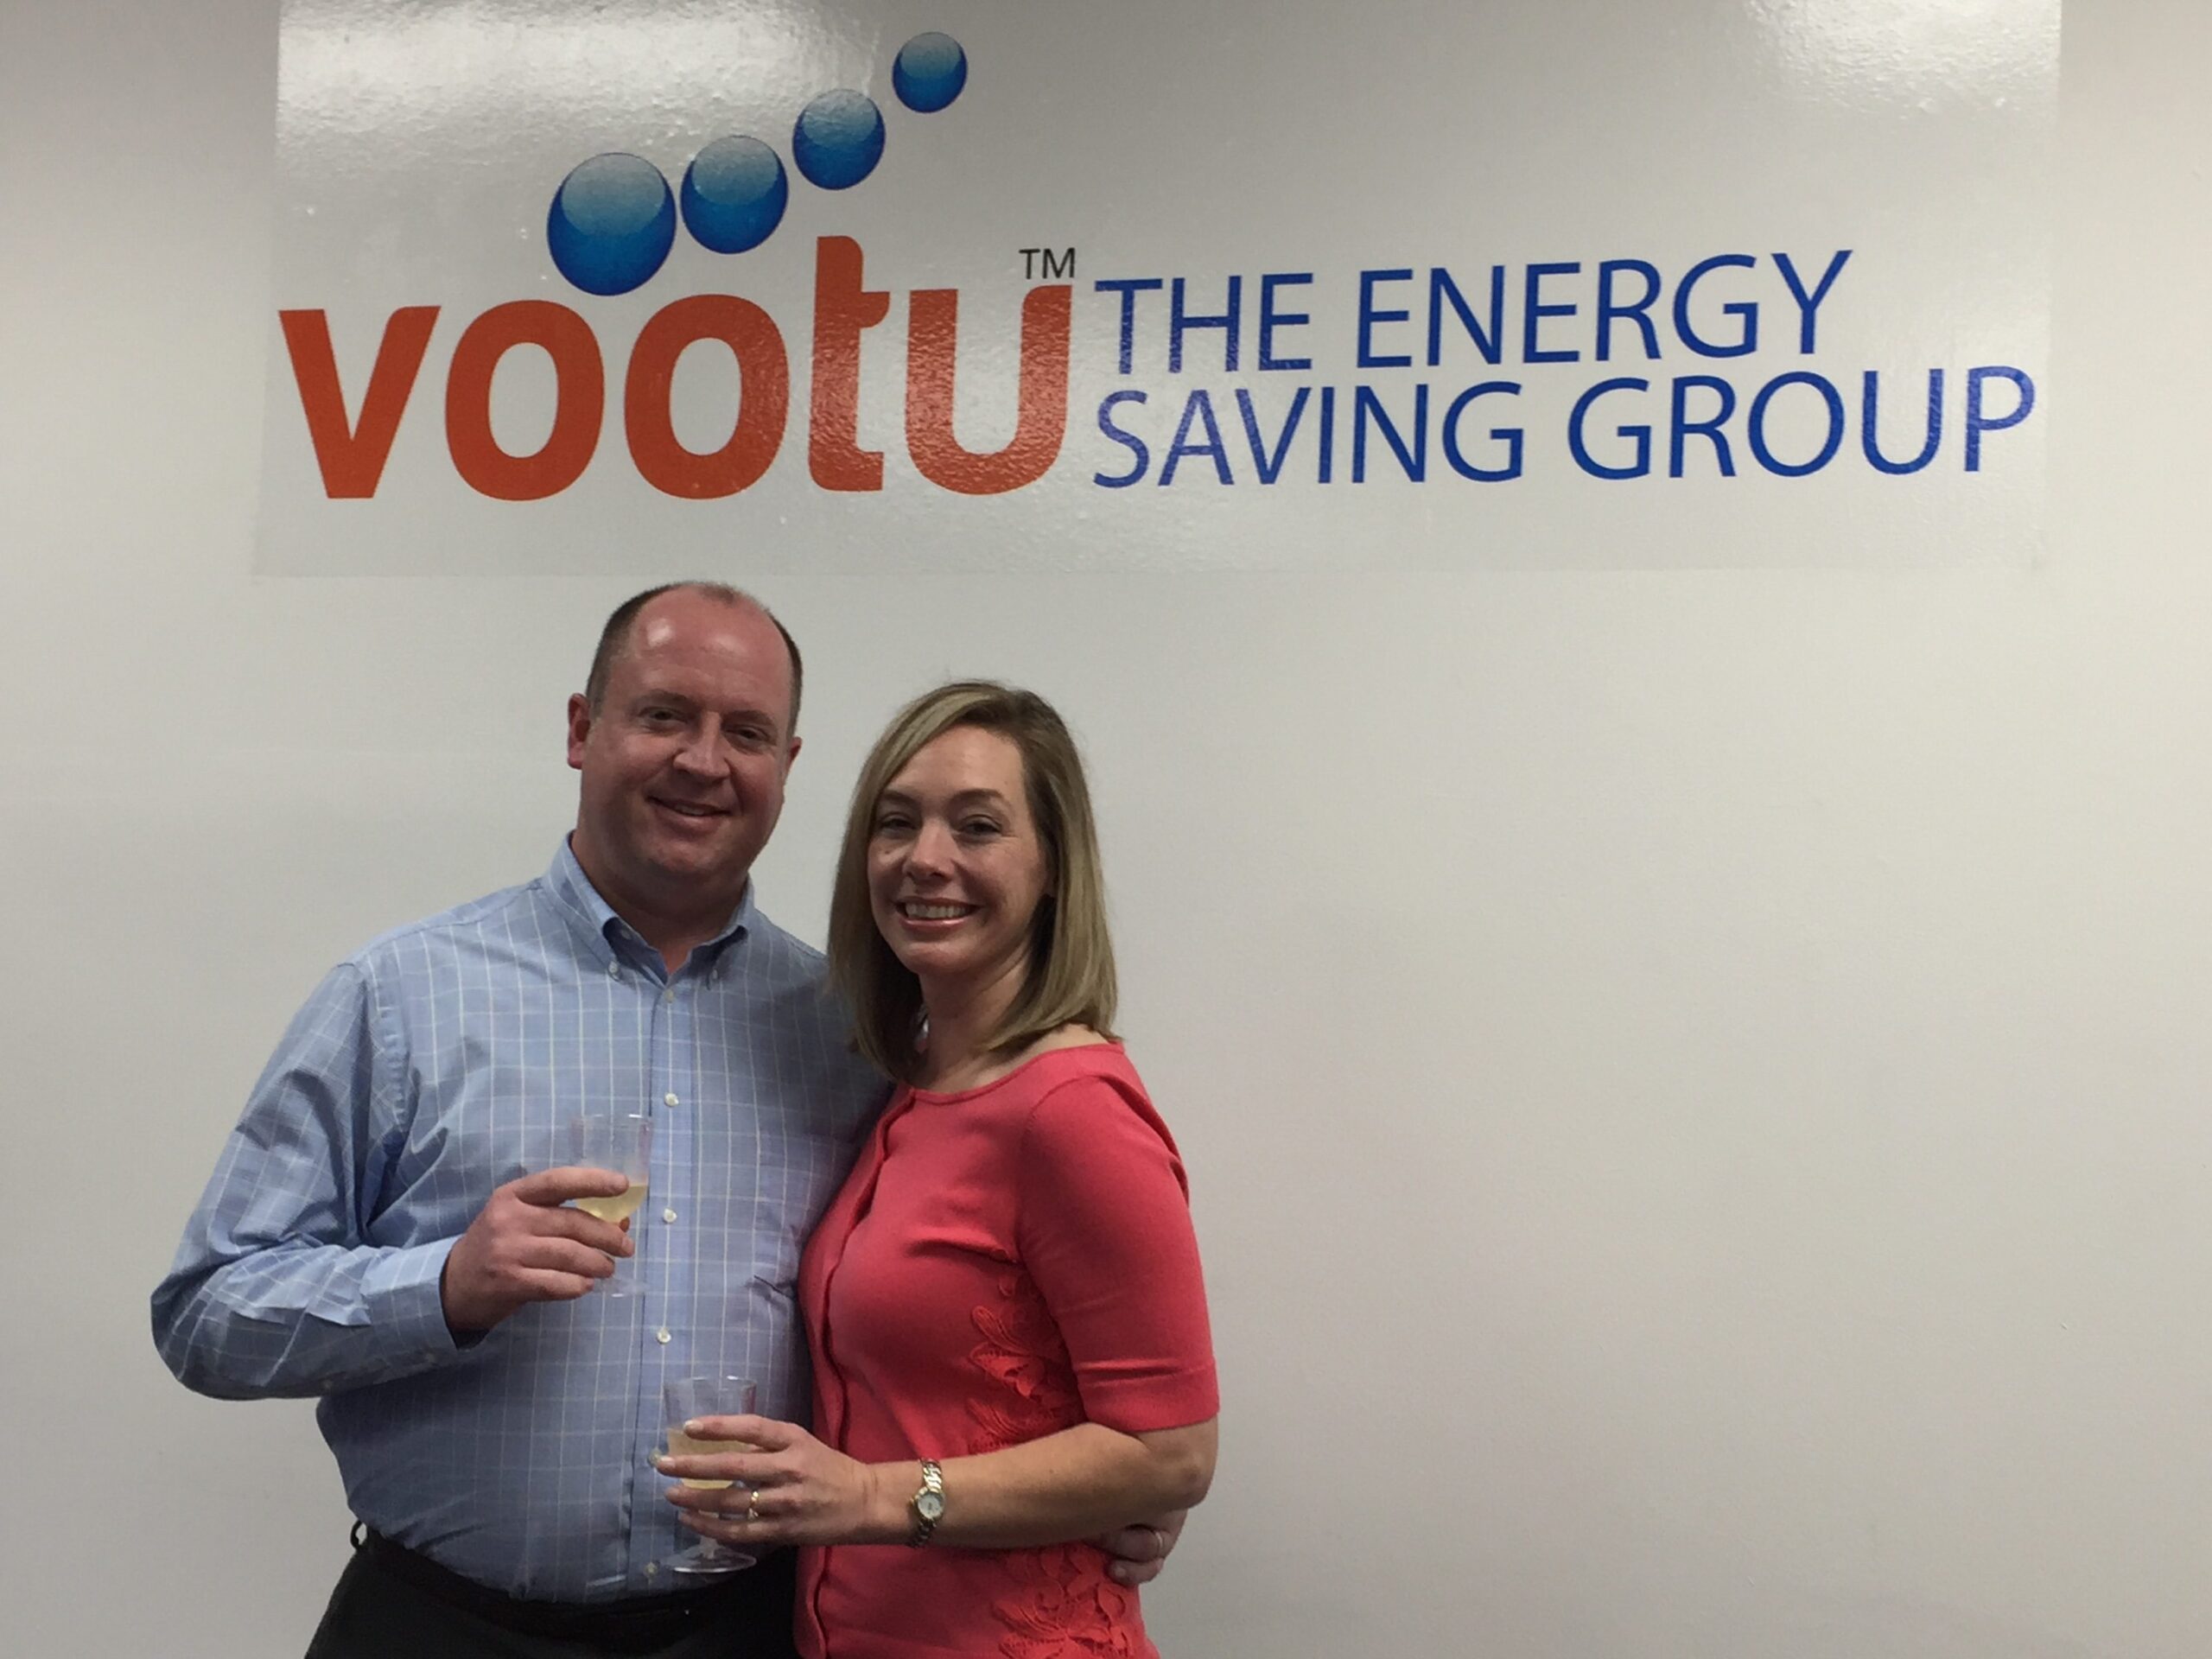 Congratulations to Jason & Lillian, vootu’s first franchisees!